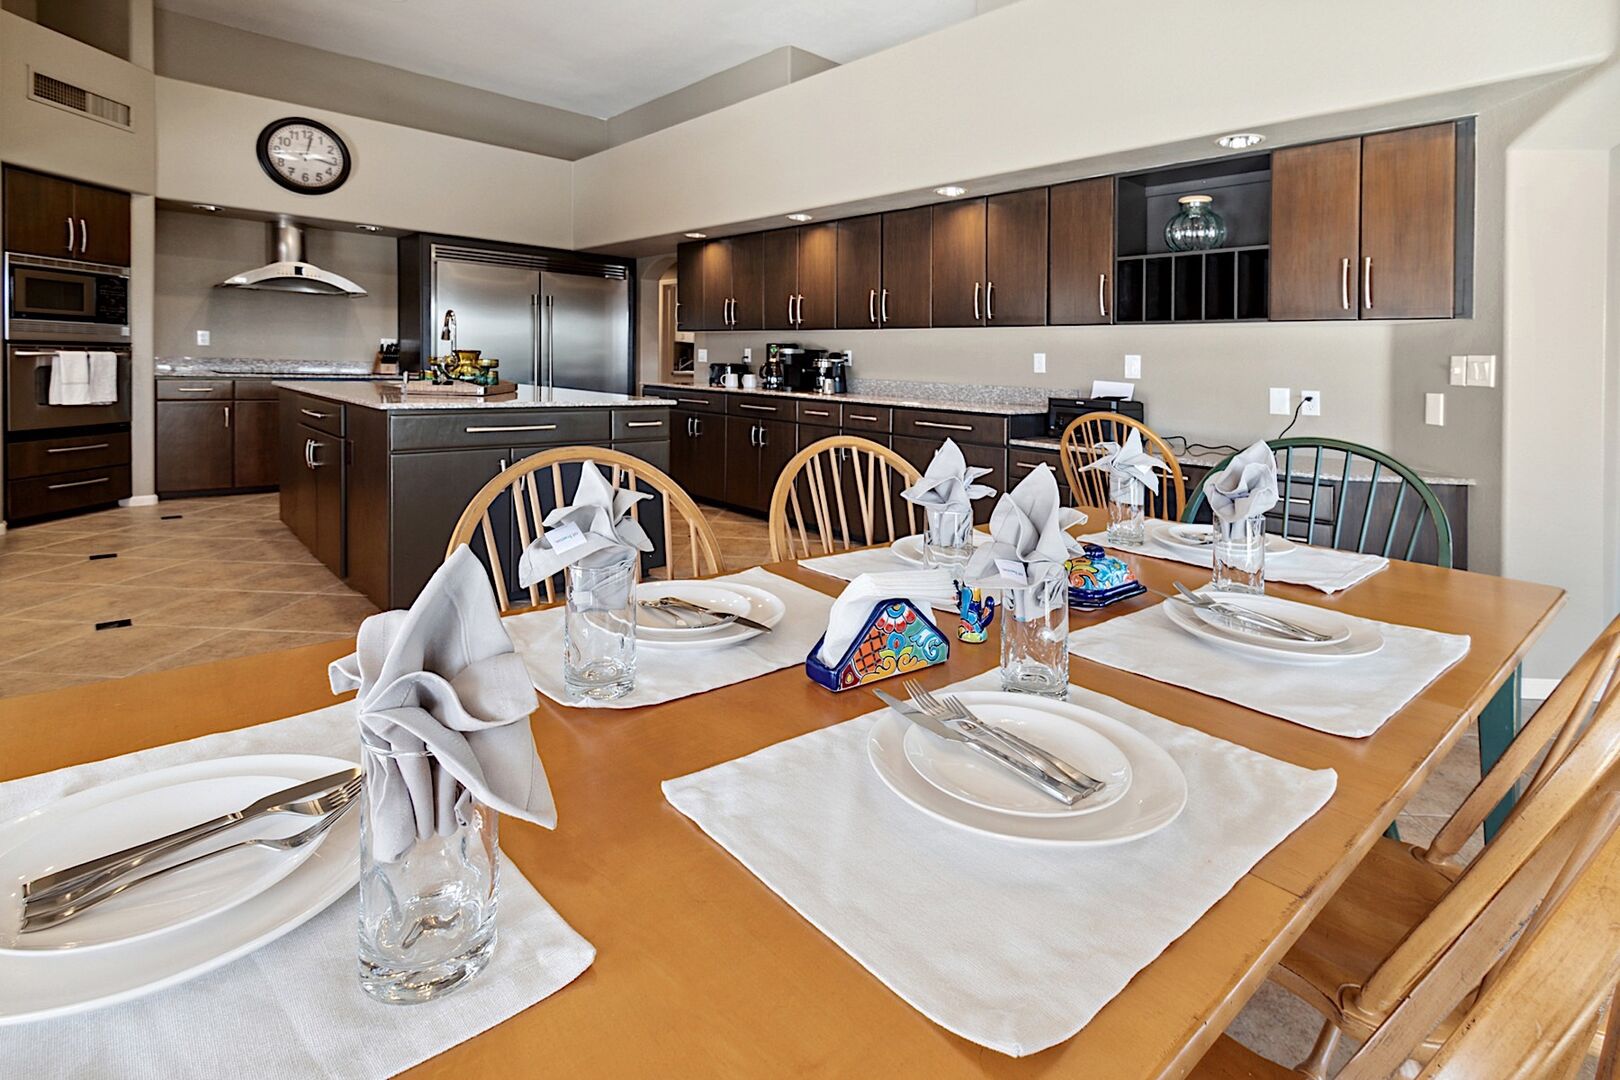 Eat-in kitchen w/ dining table for 6.